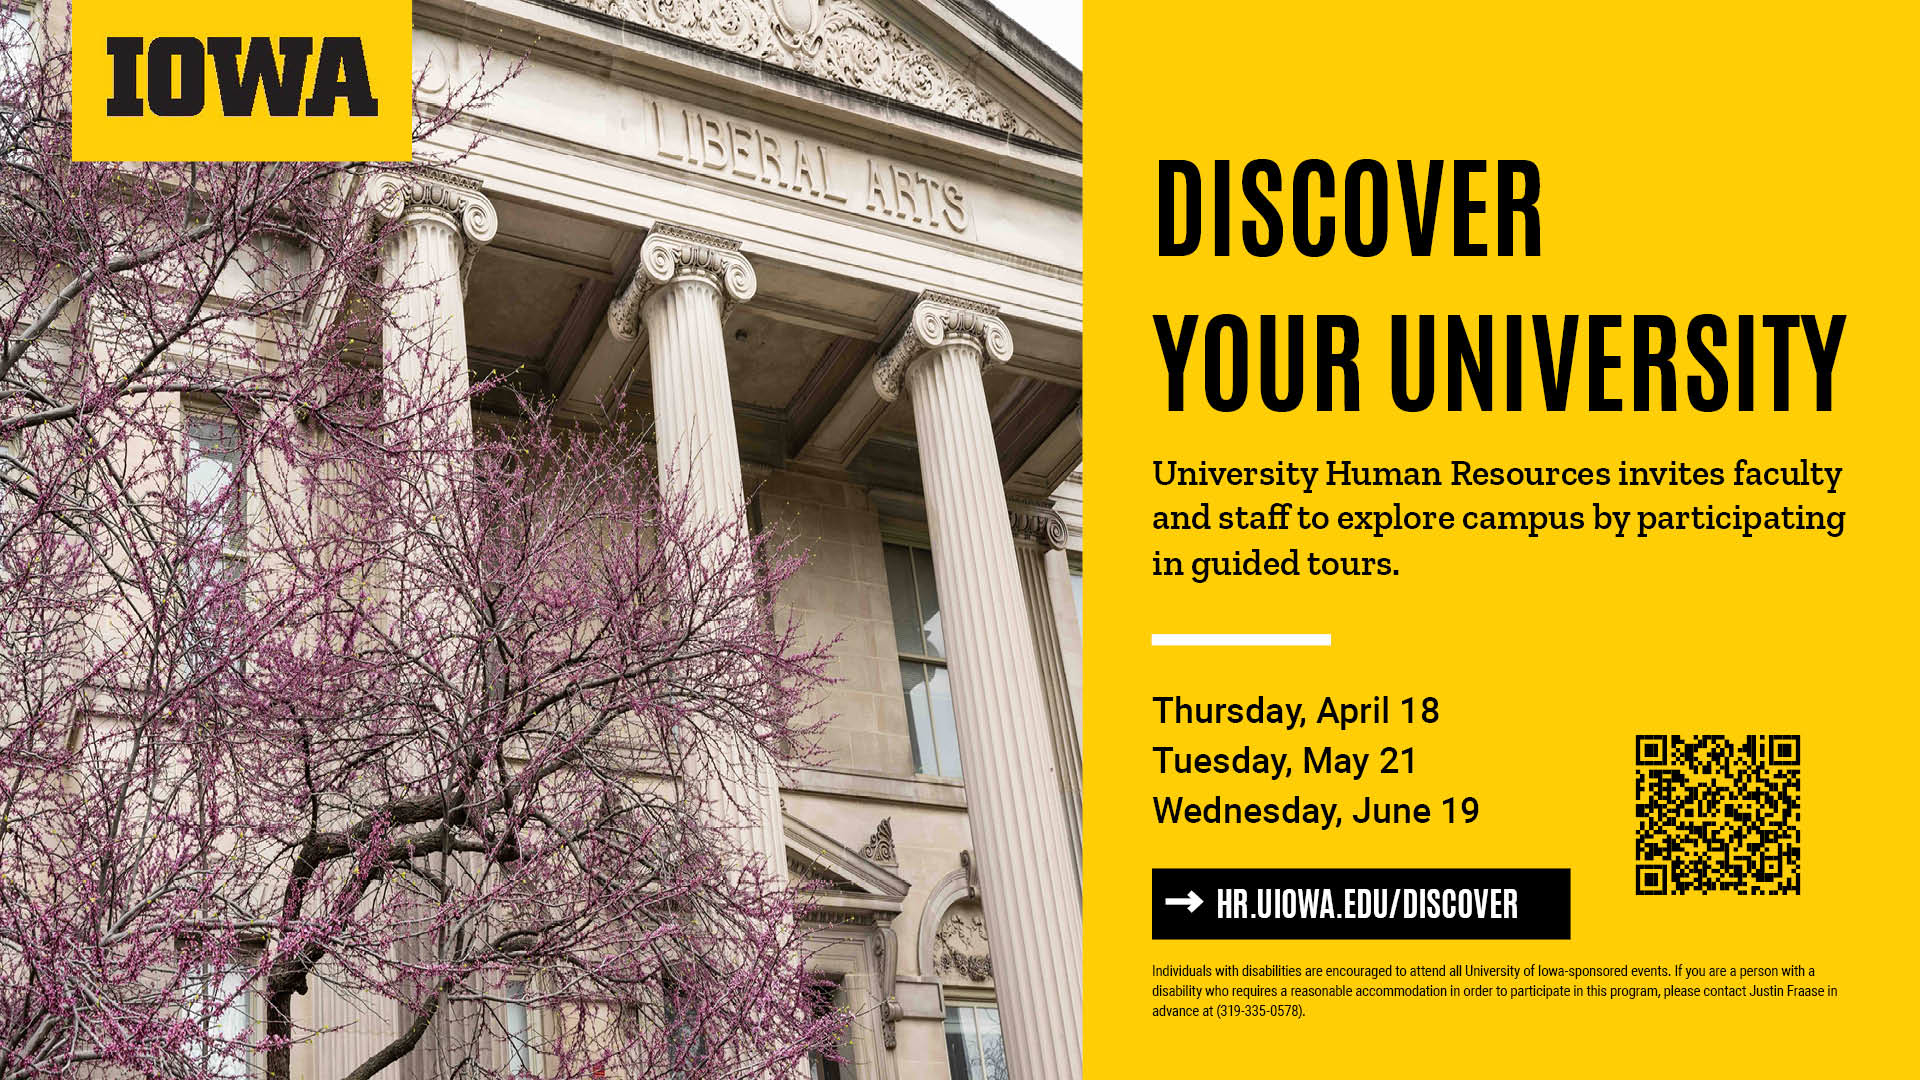 Discover your university guided tours take place April13, May 17, and June 20